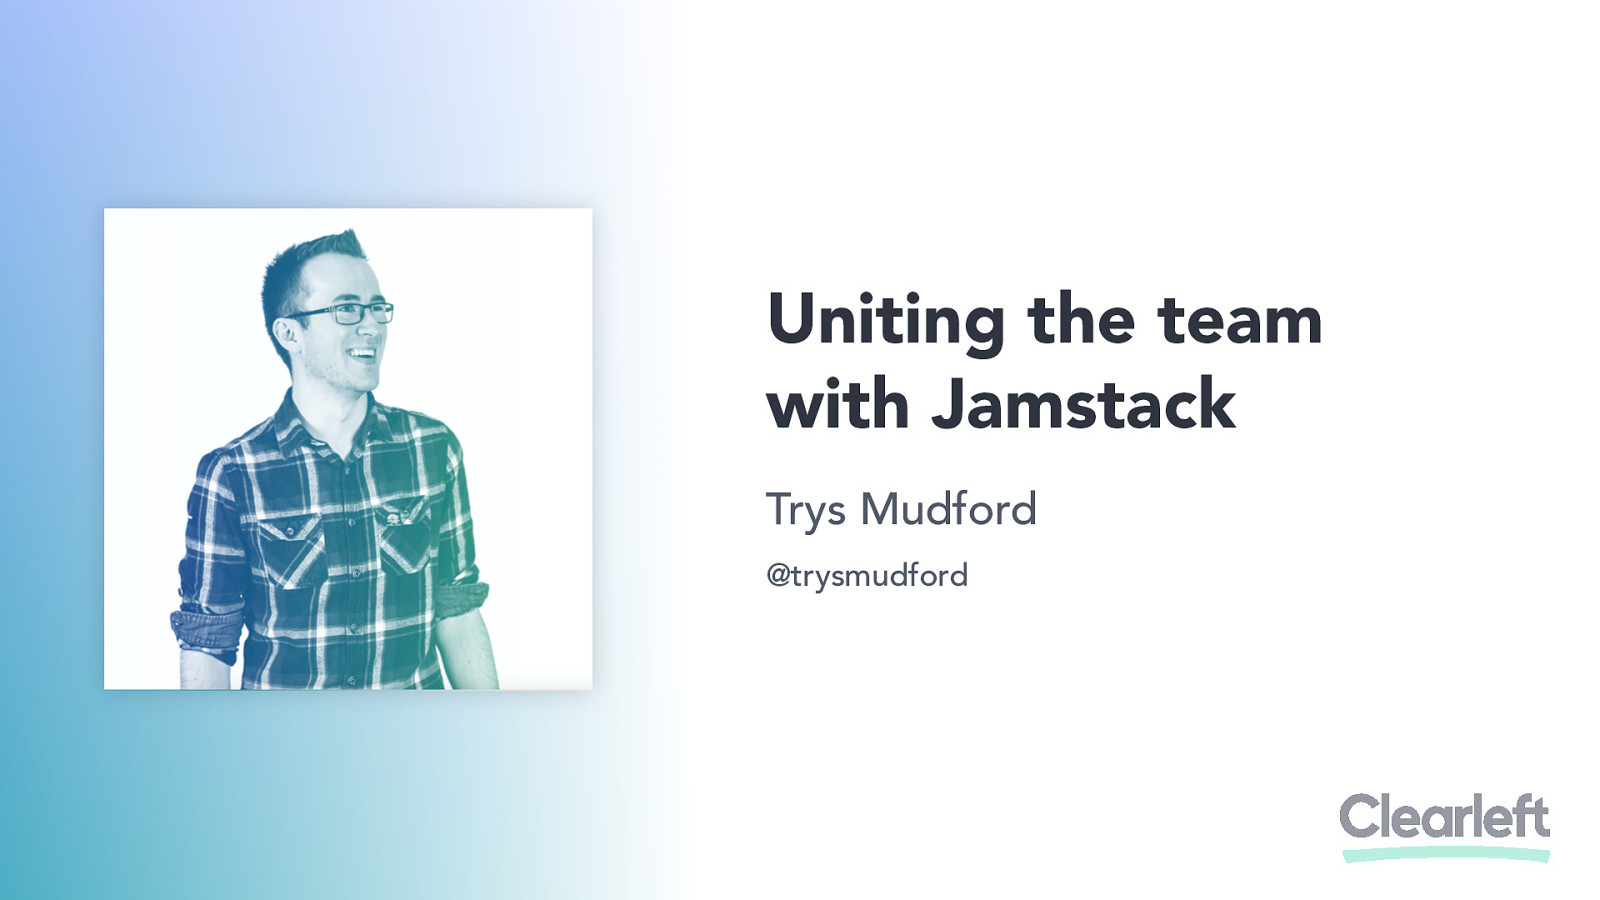 Uniting the team with Jamstack